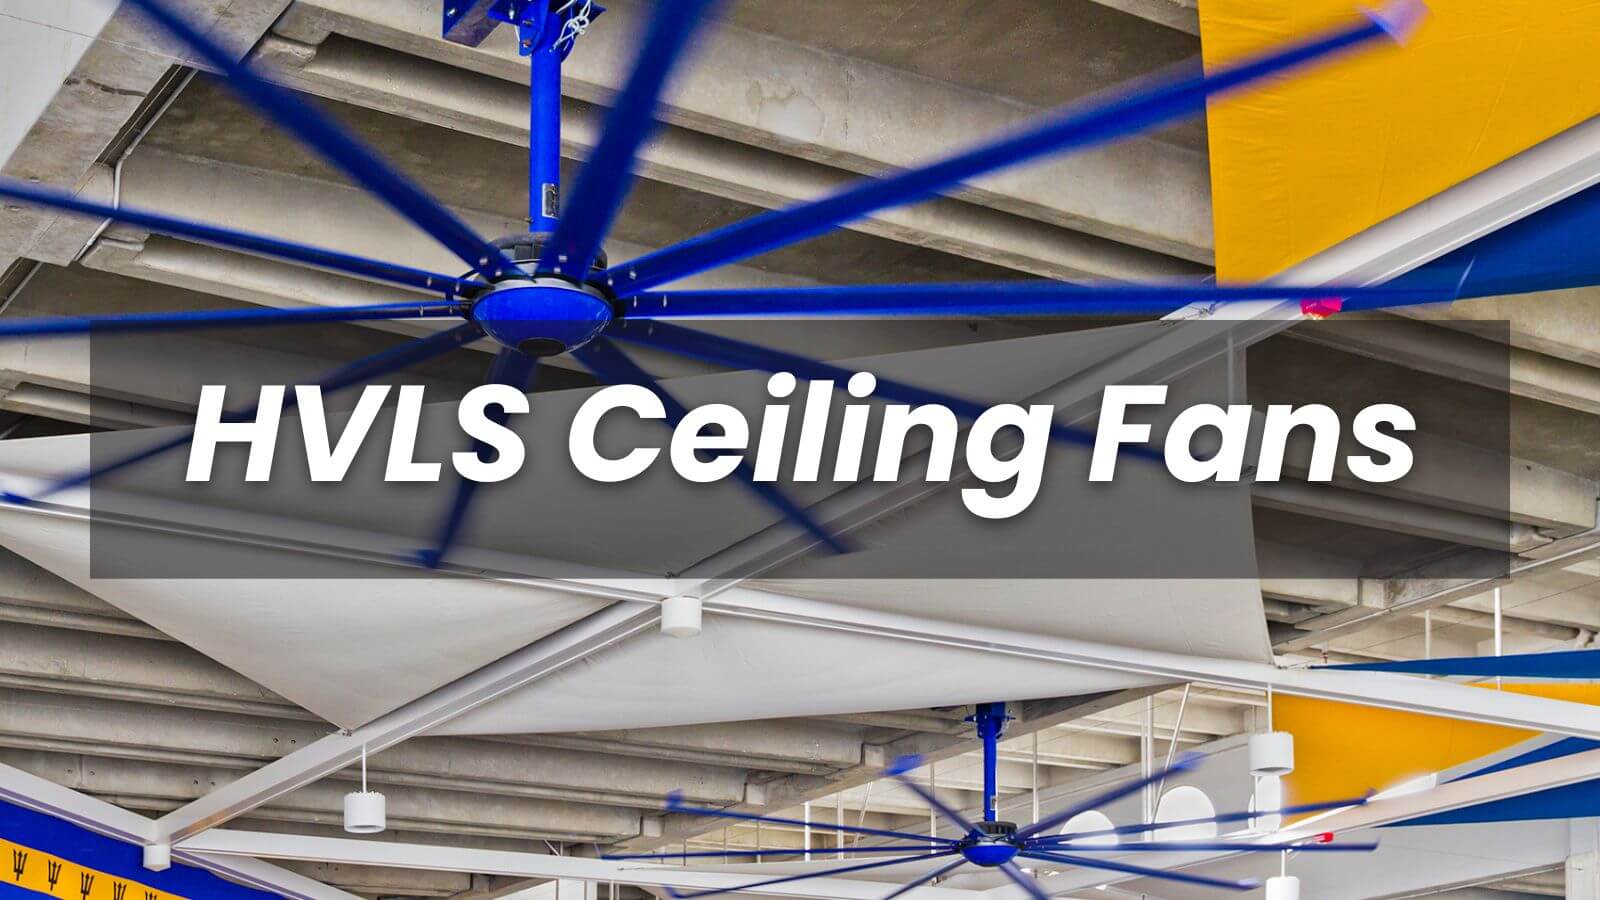 HVLS Ceiling Fan Philippines